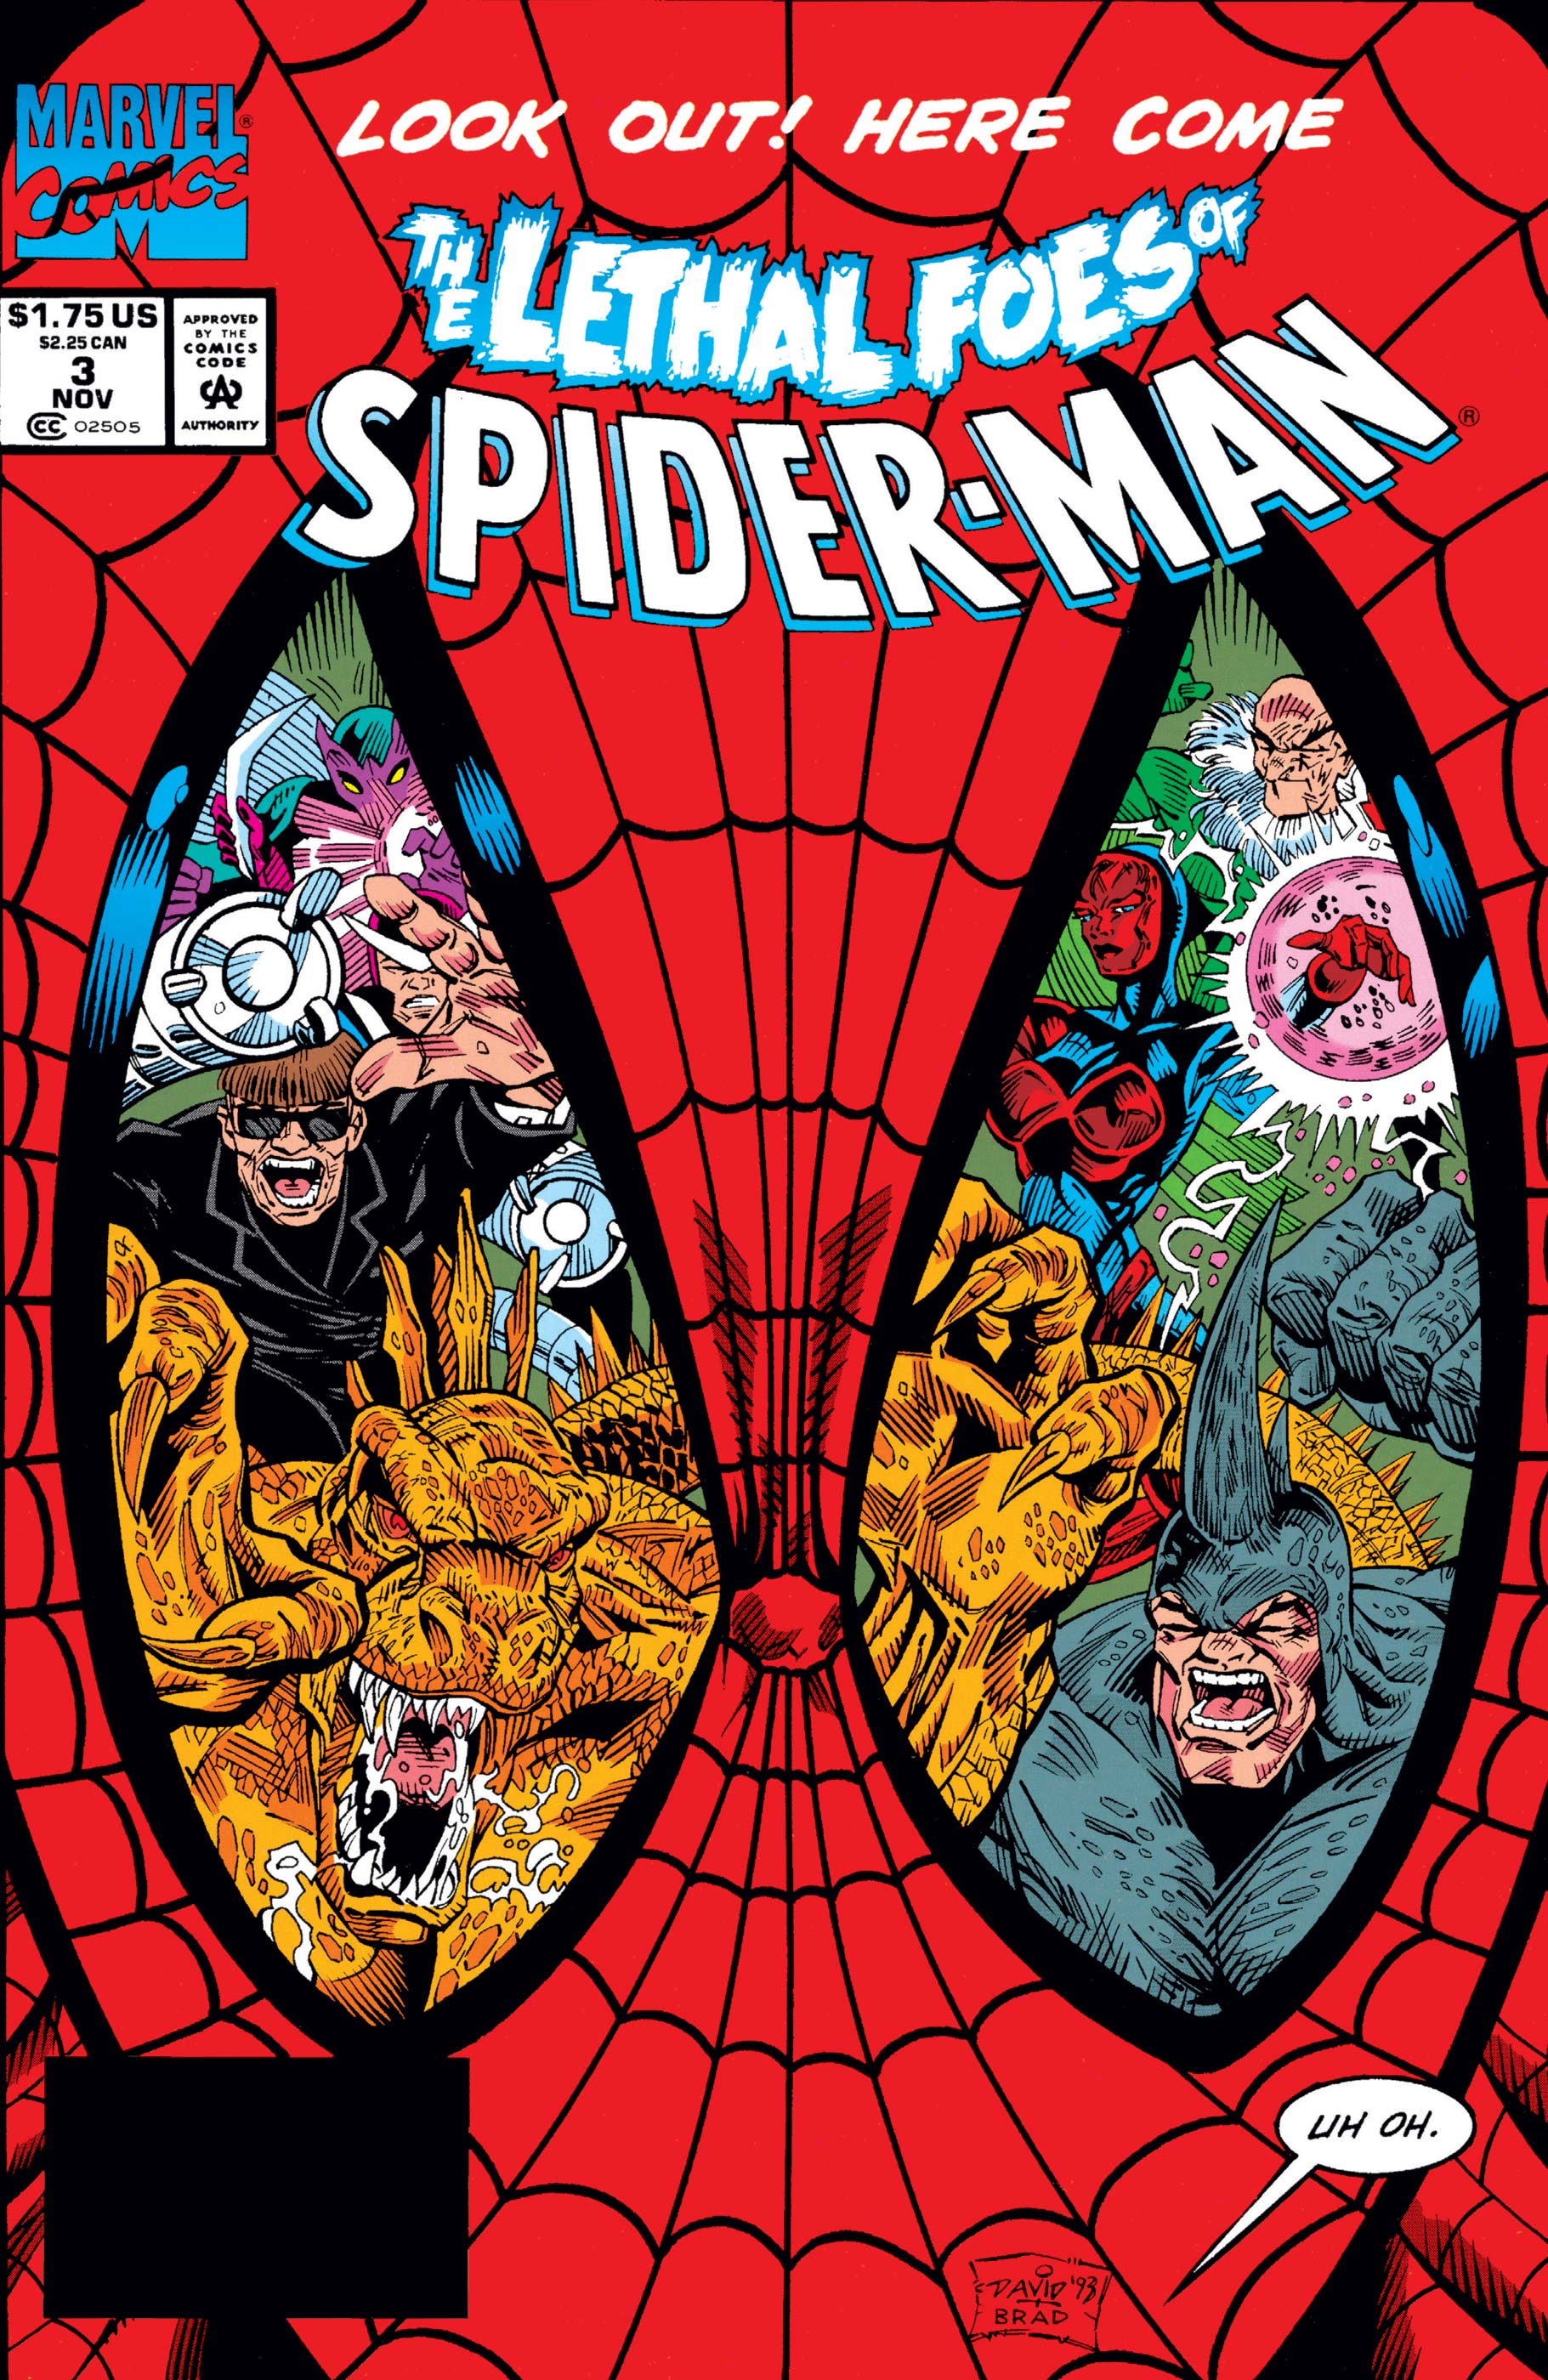 Lethal Foes of Spider-Man (1993) #3